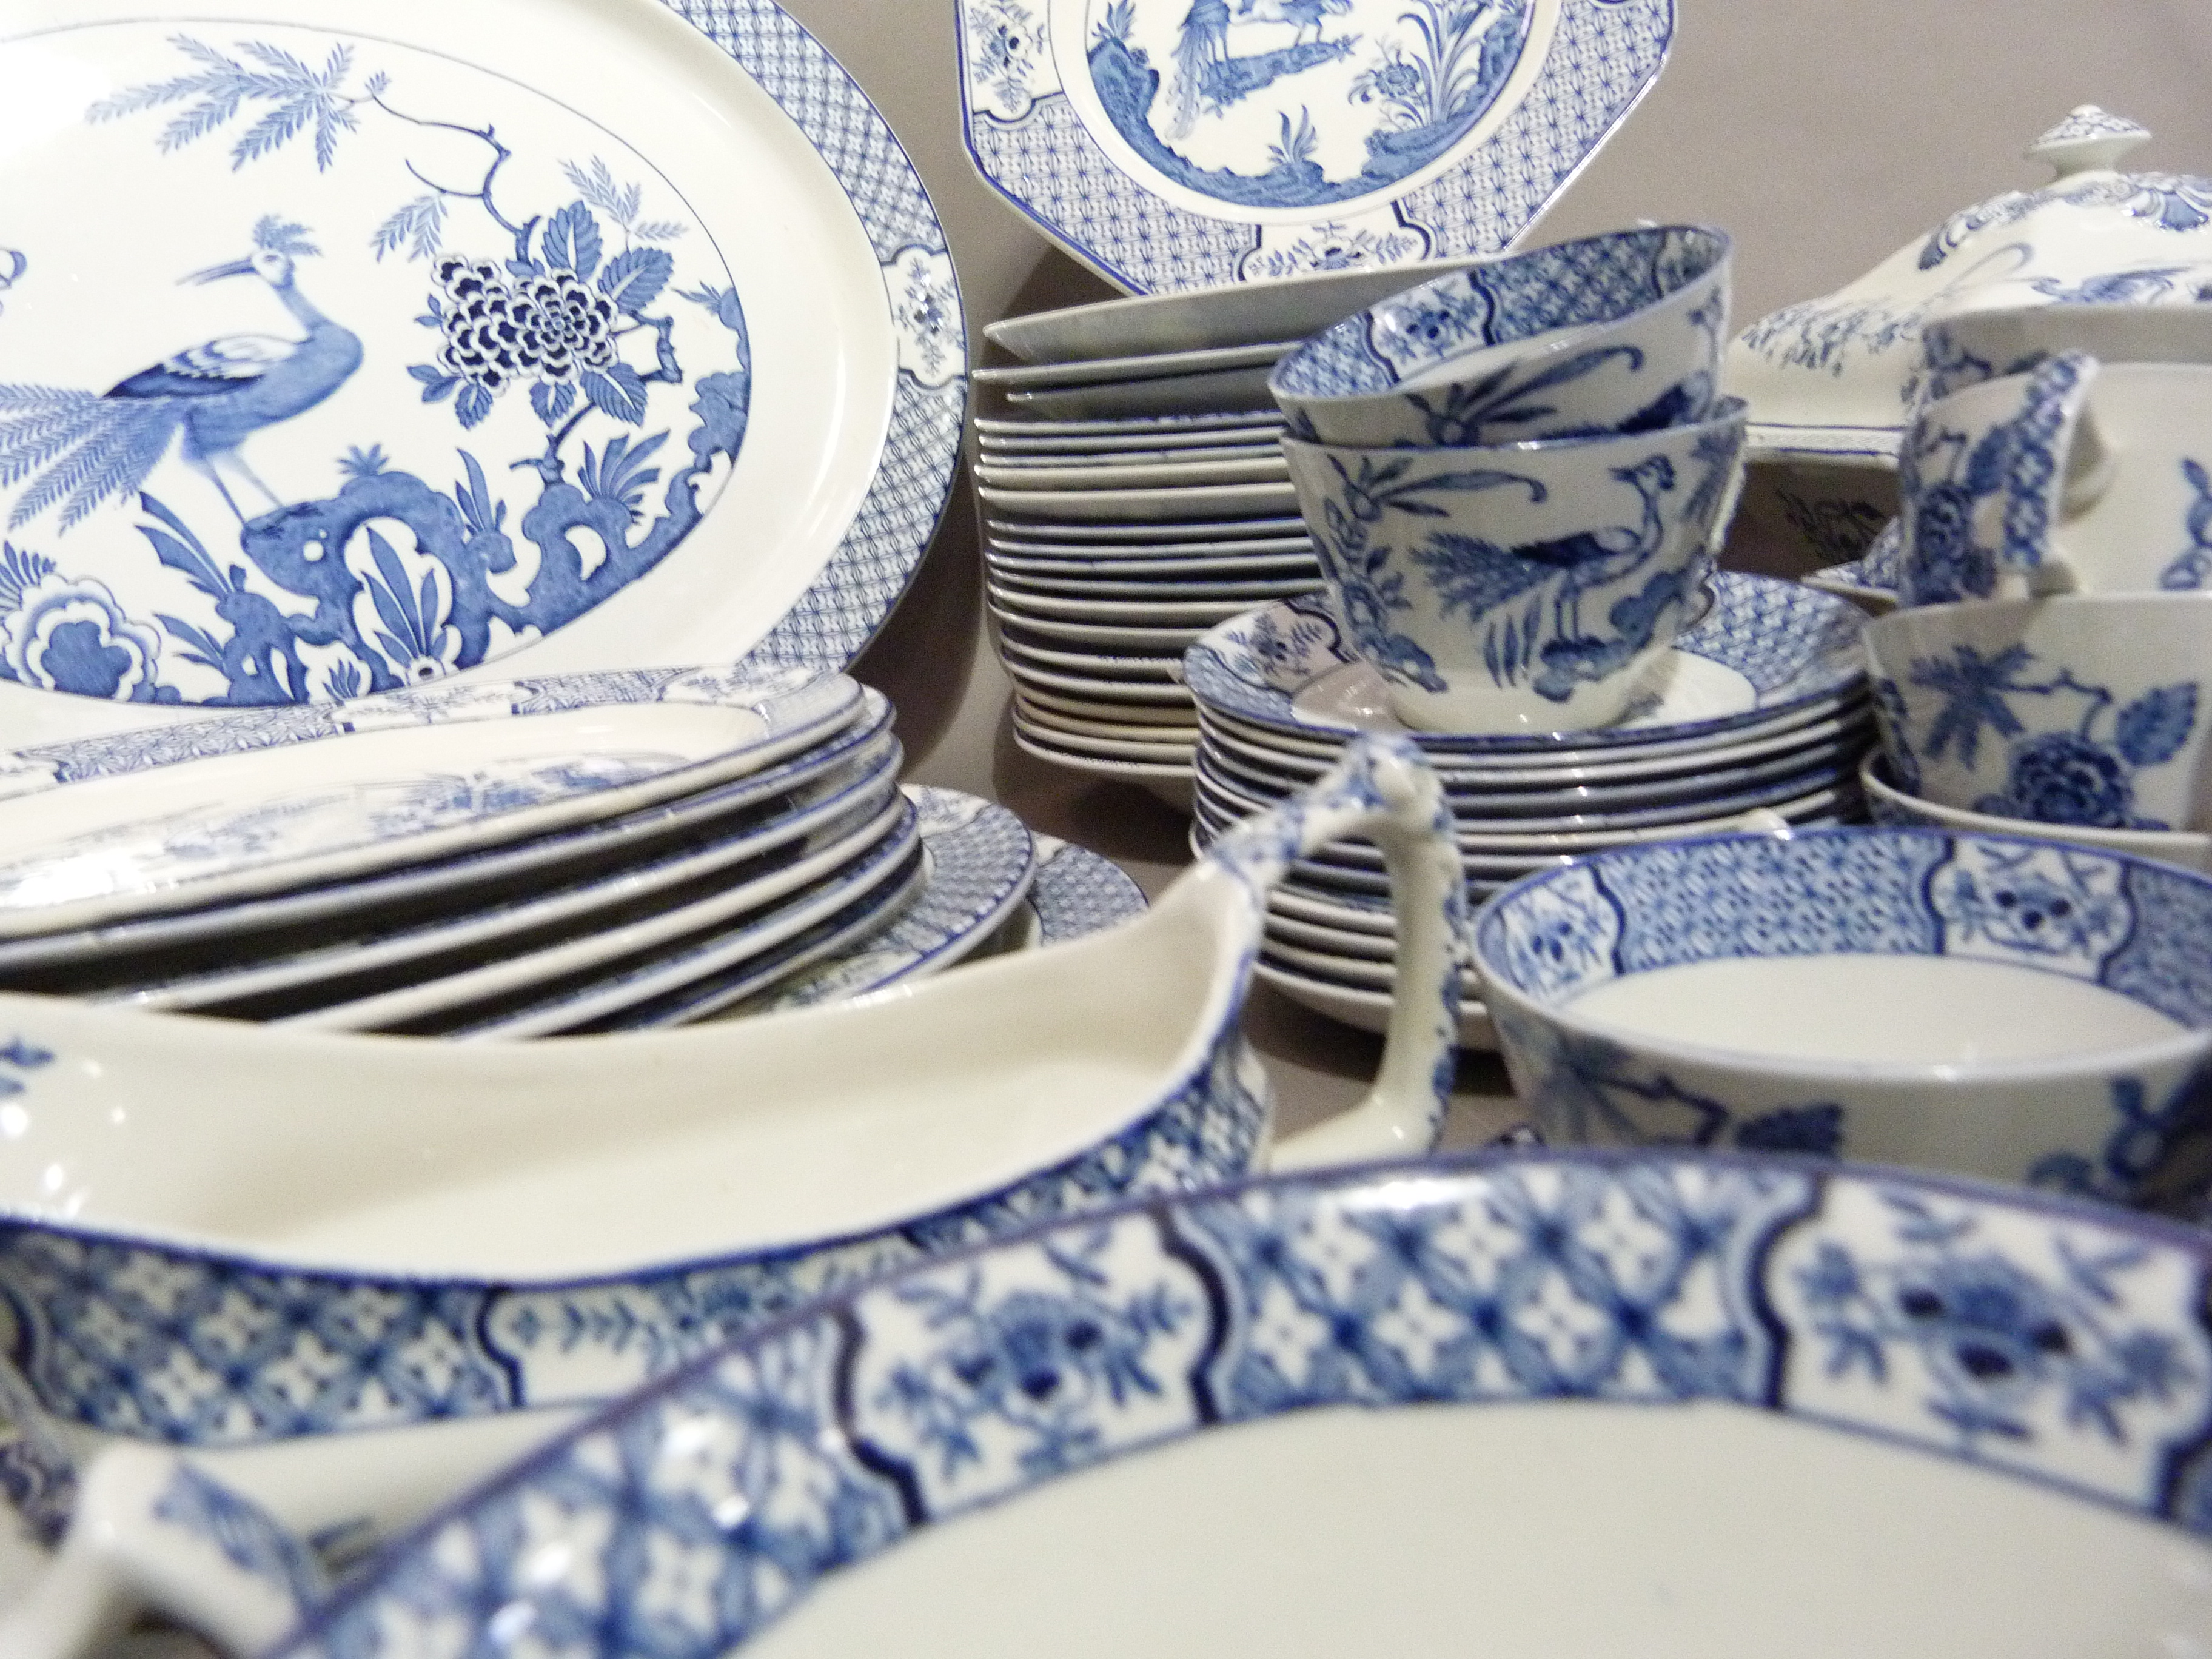 An extensive yuan ware blue and white dinner service - Image 3 of 6